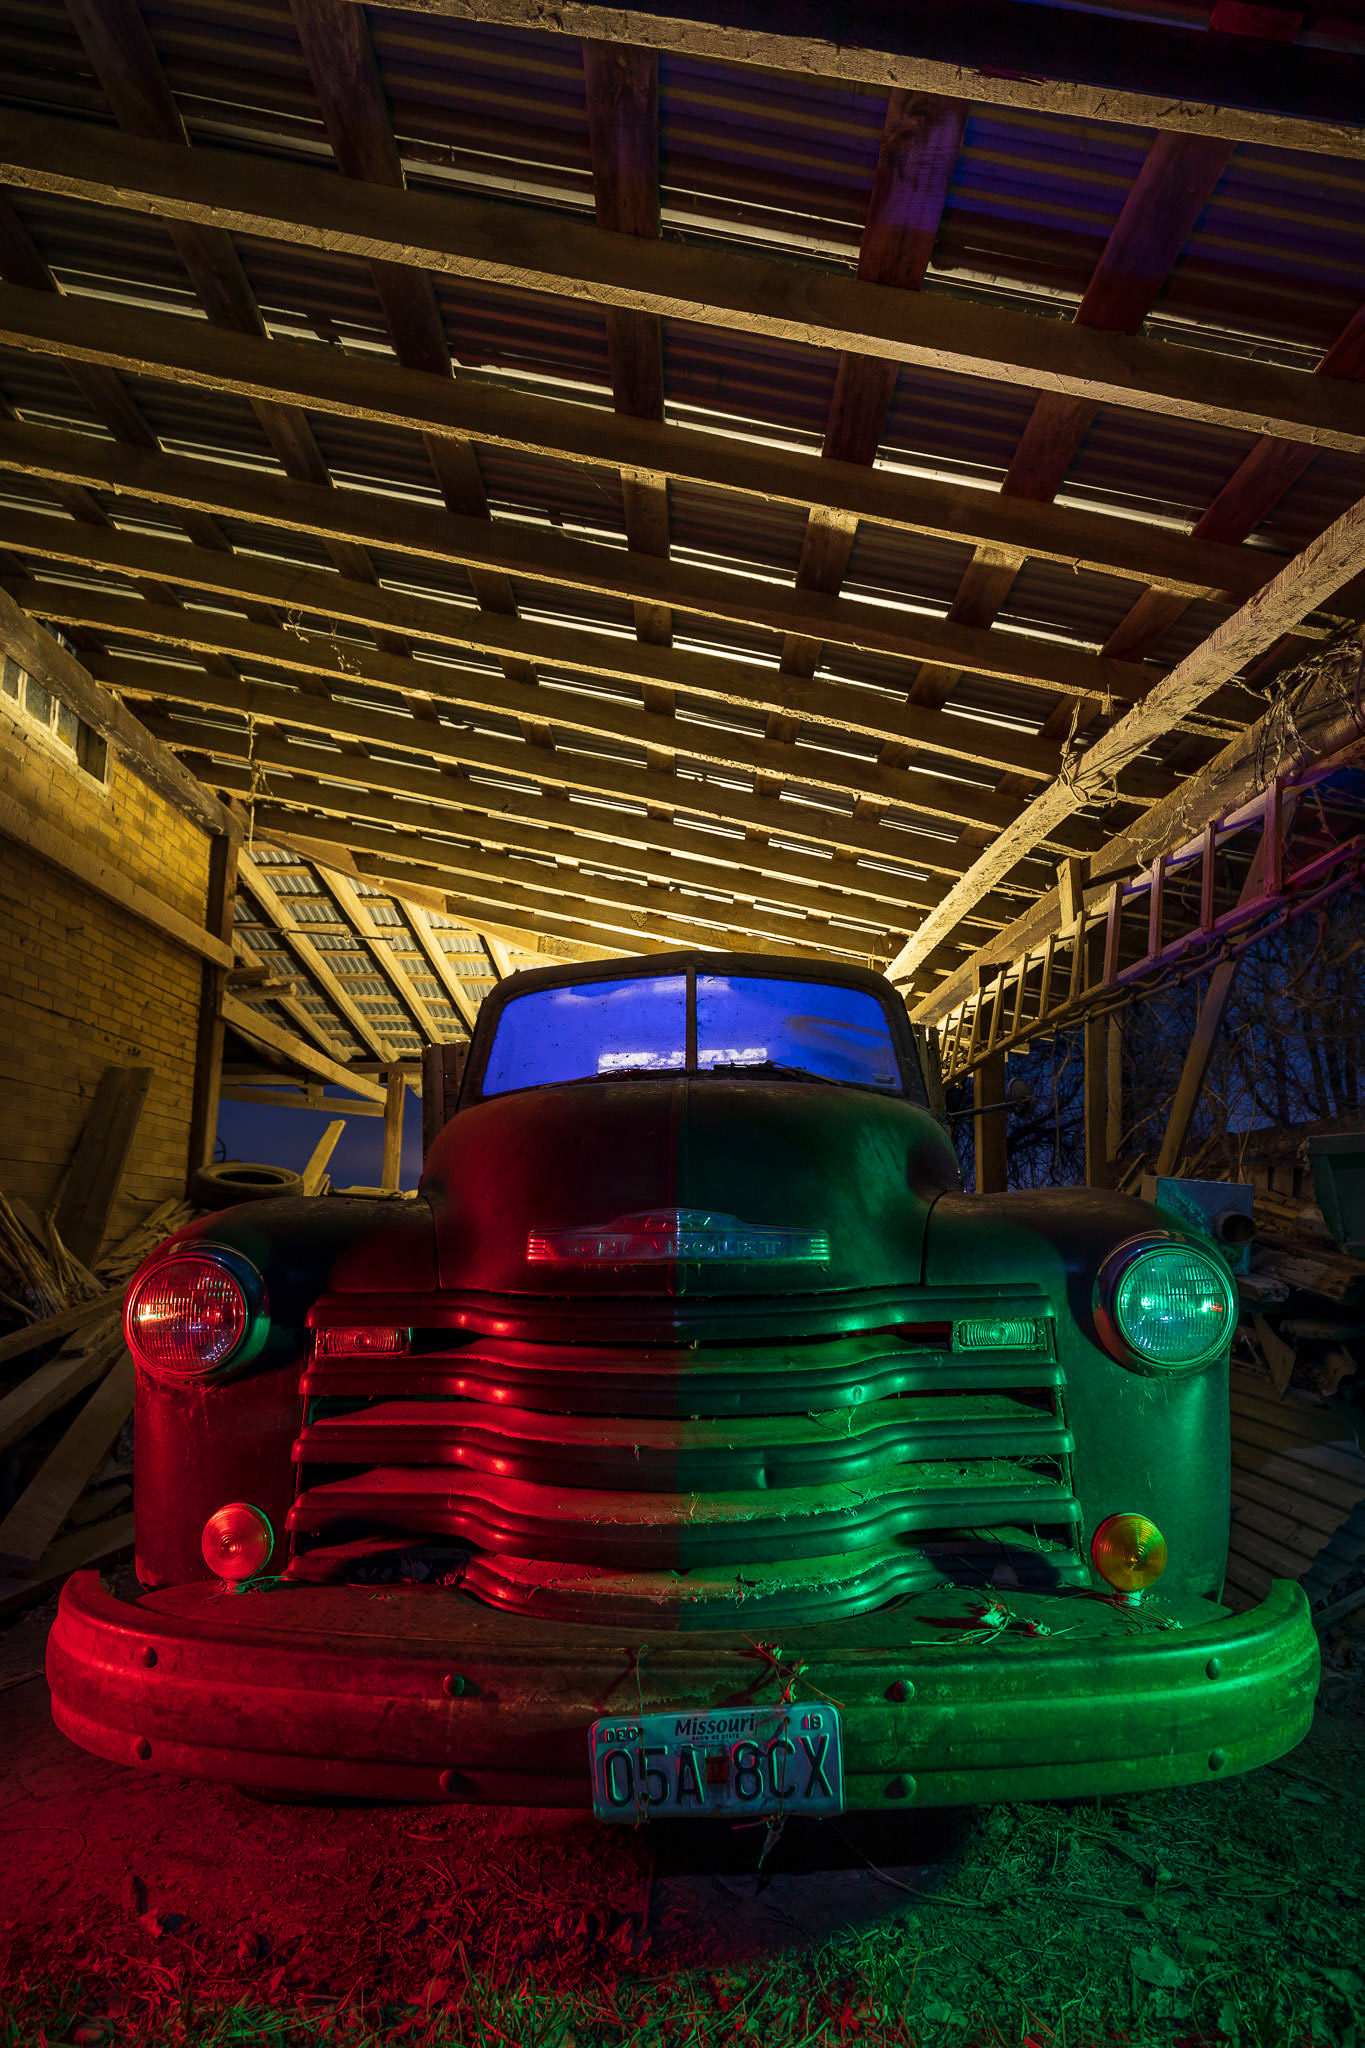 A dilapidated carport and farm truck illuminated with colored lights.